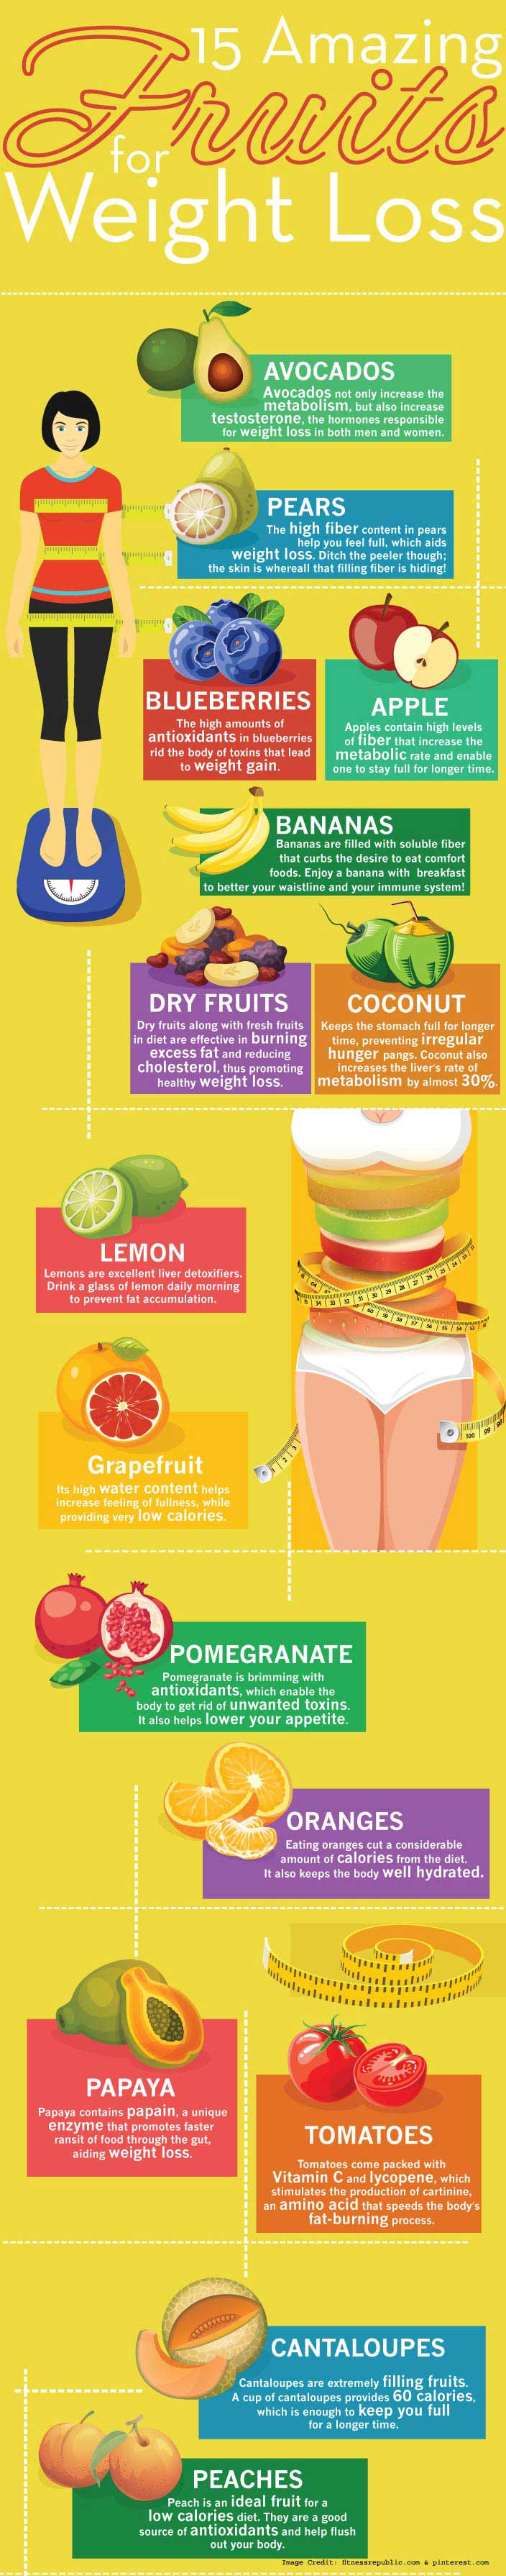 Weight Loss Foods to Eat if You Sit All Day at Work